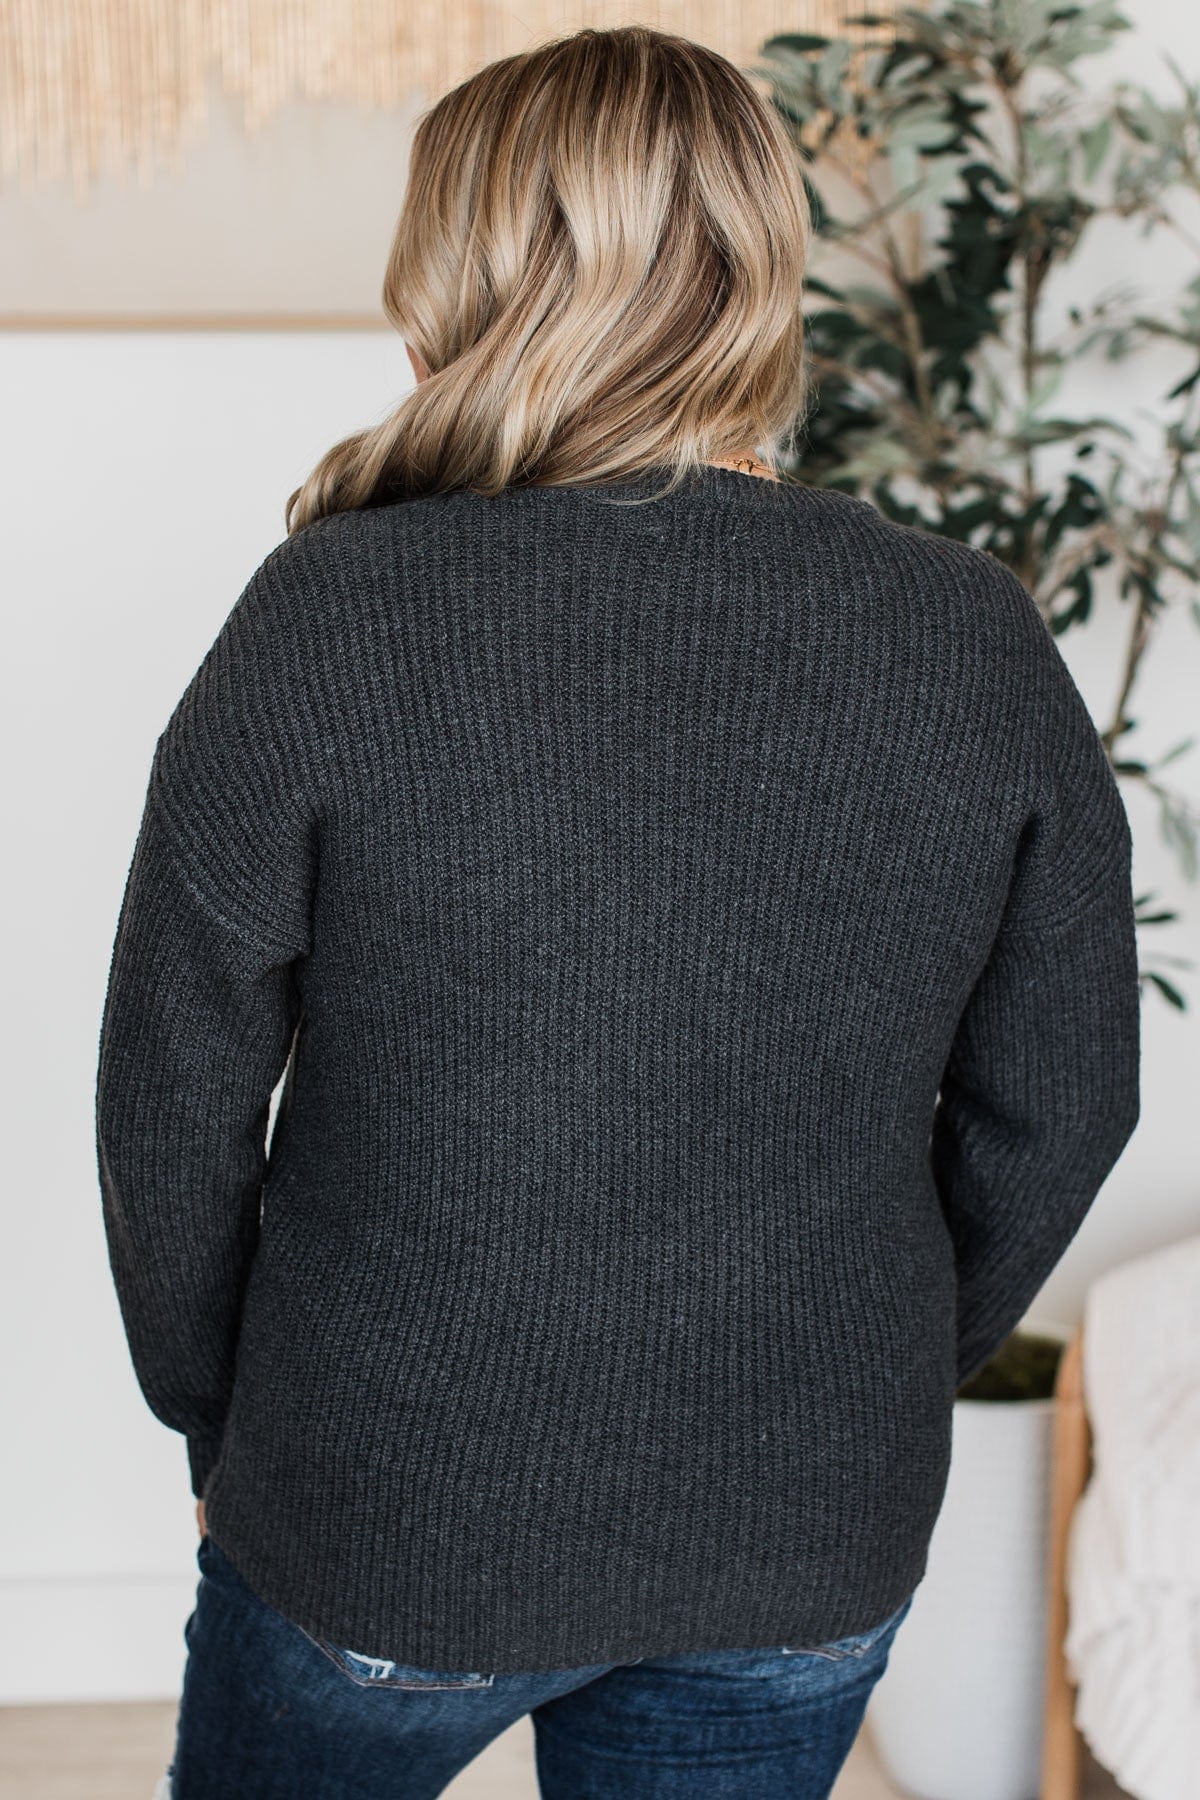 Waiting For Winter Knit Sweater- Charcoal